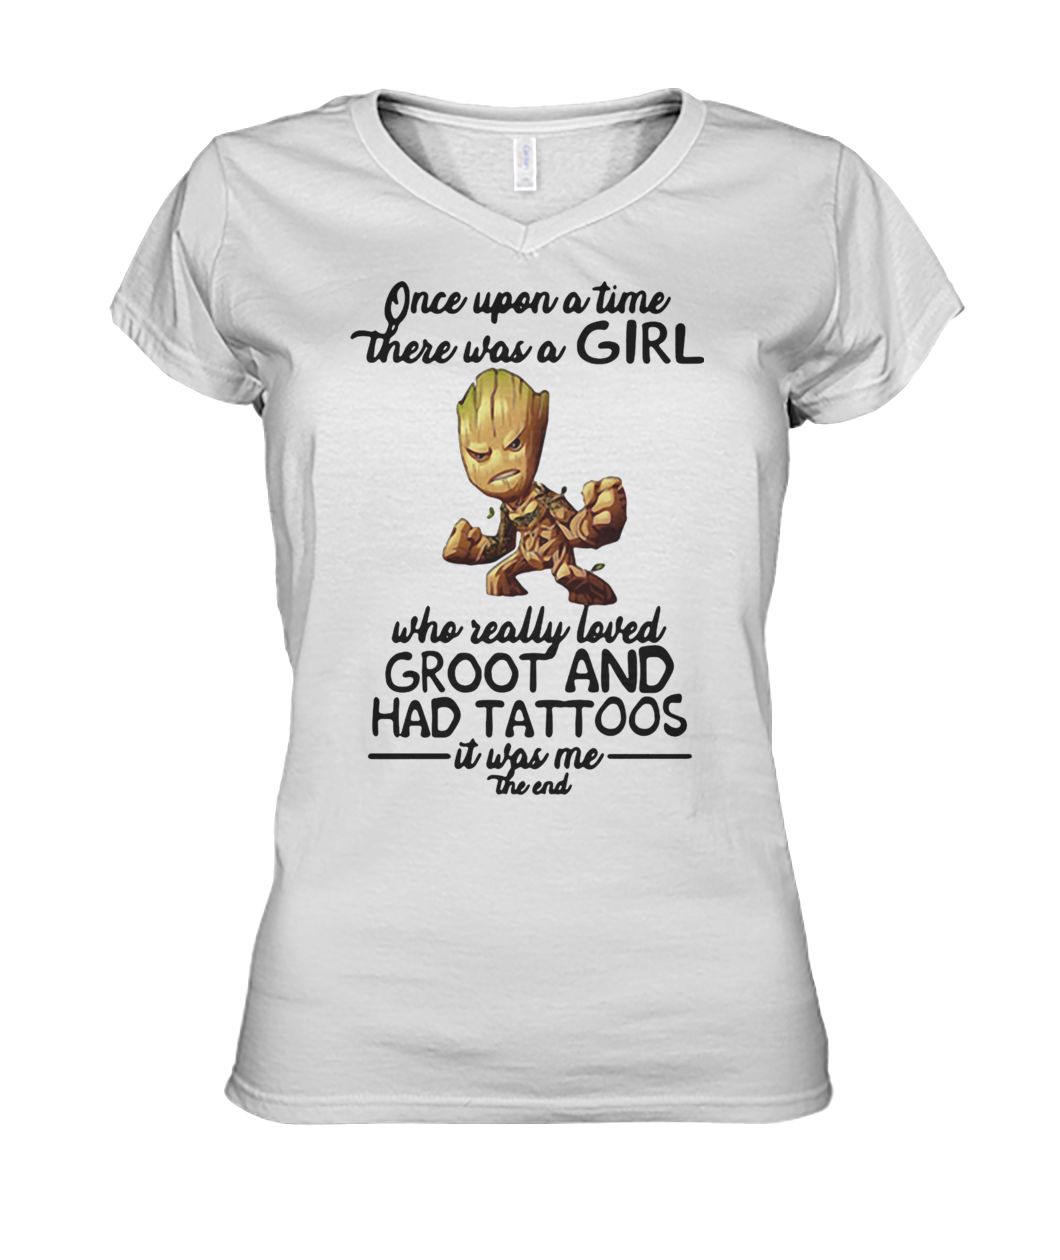 Once upon a time there was a girl who really loved groot and had tattoos it was me the end women's v-neck